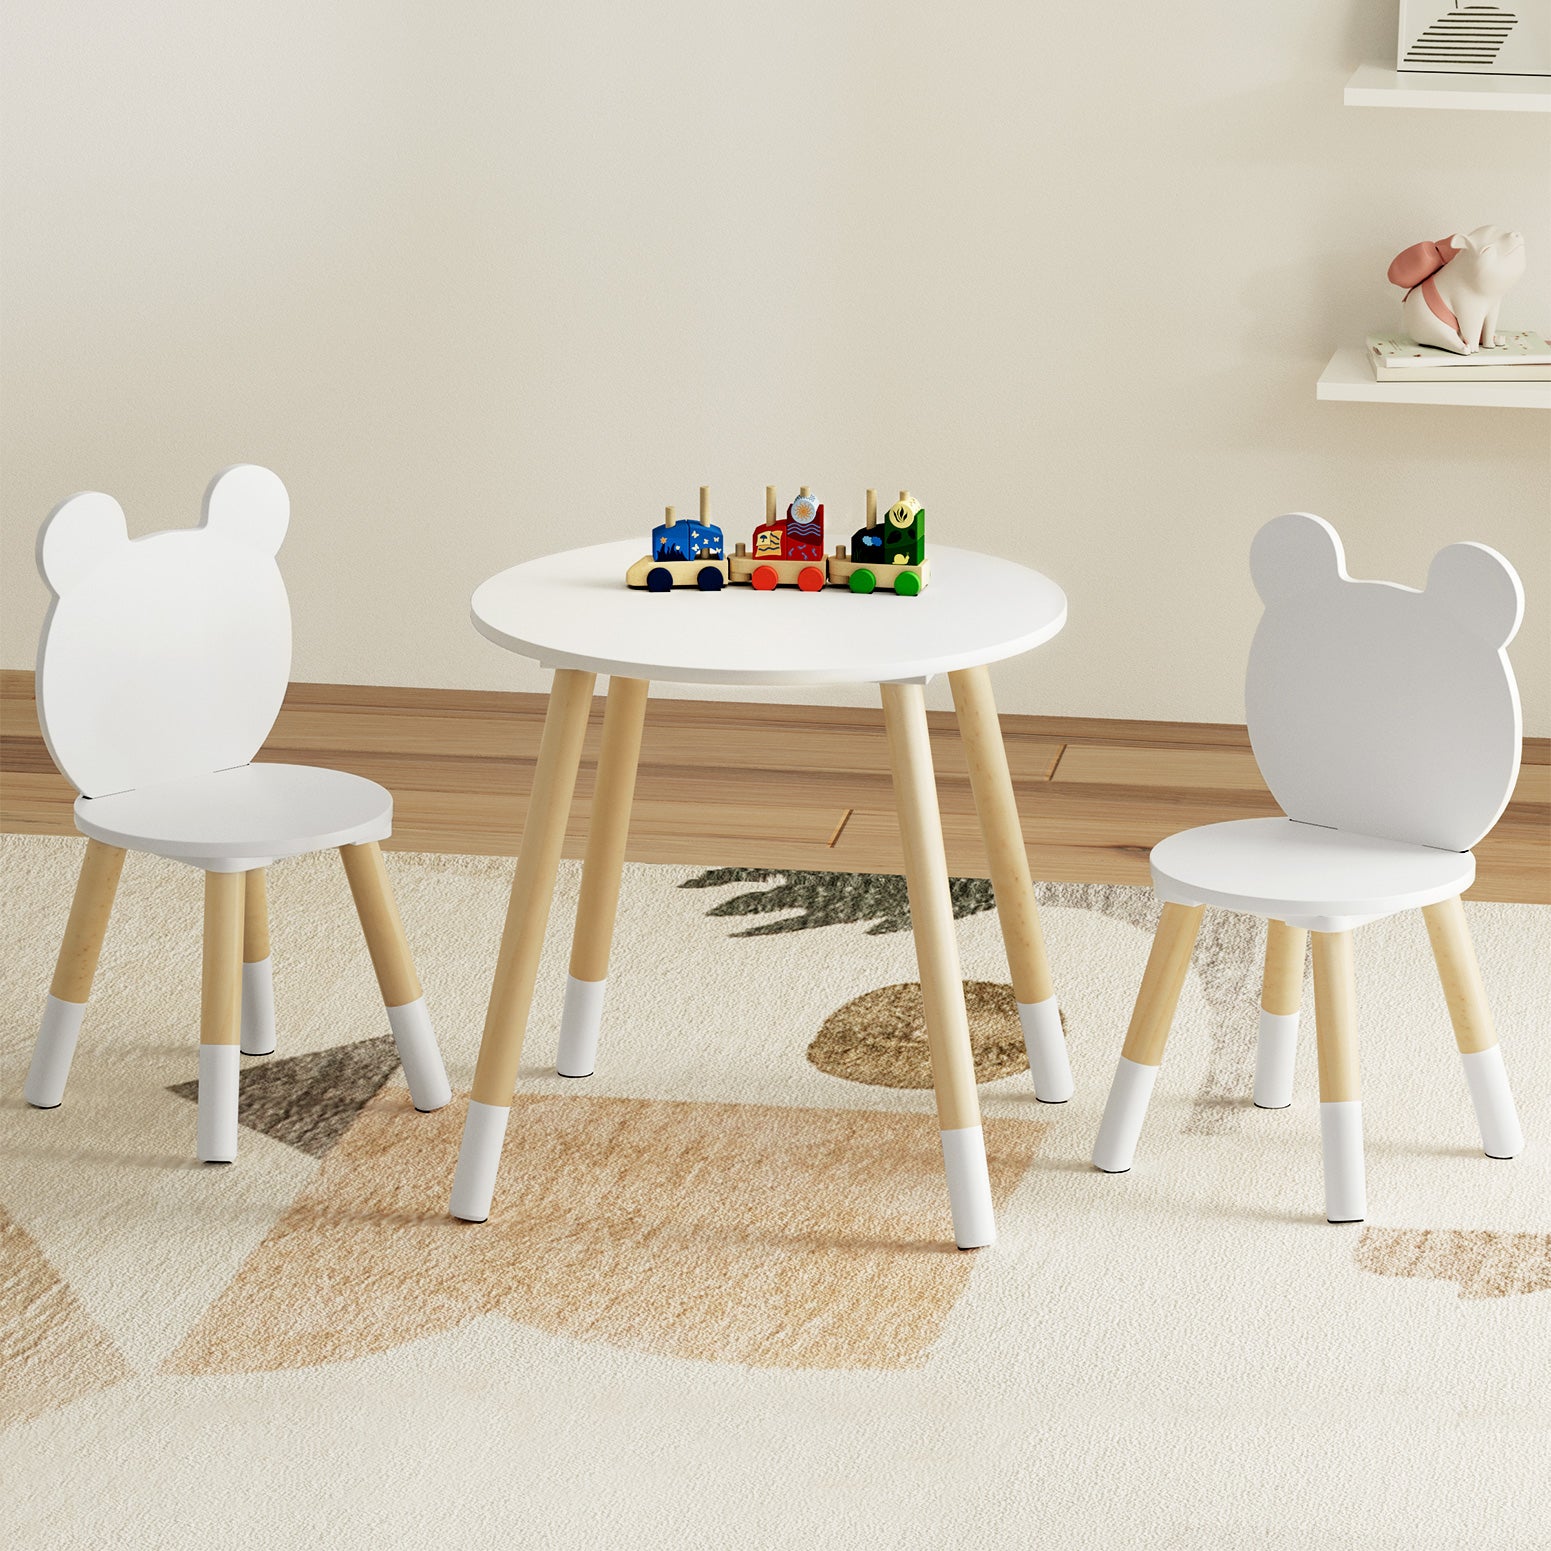 Keezi 3 Piece Kids Table and Chairs Set Activity Playing Study Children Desk - SILBERSHELL